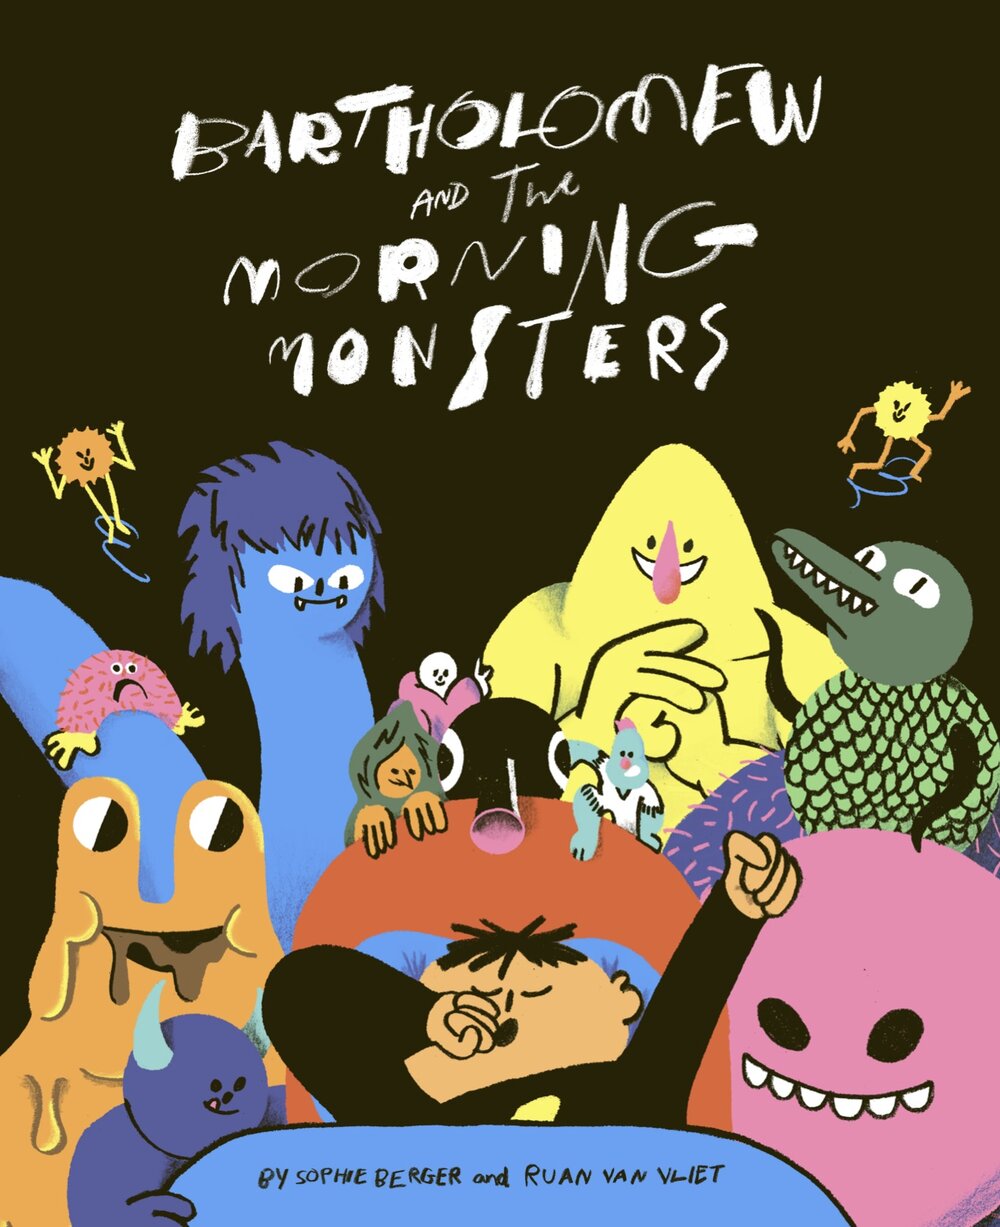 Cover for the children's book "Bartholomew and the Morning Monsters," featuring a child with tan skin and a tuft of black hair yawning in bed with his eyes closed while various colorful monsters are circled around and grinning mischievously in the background. 